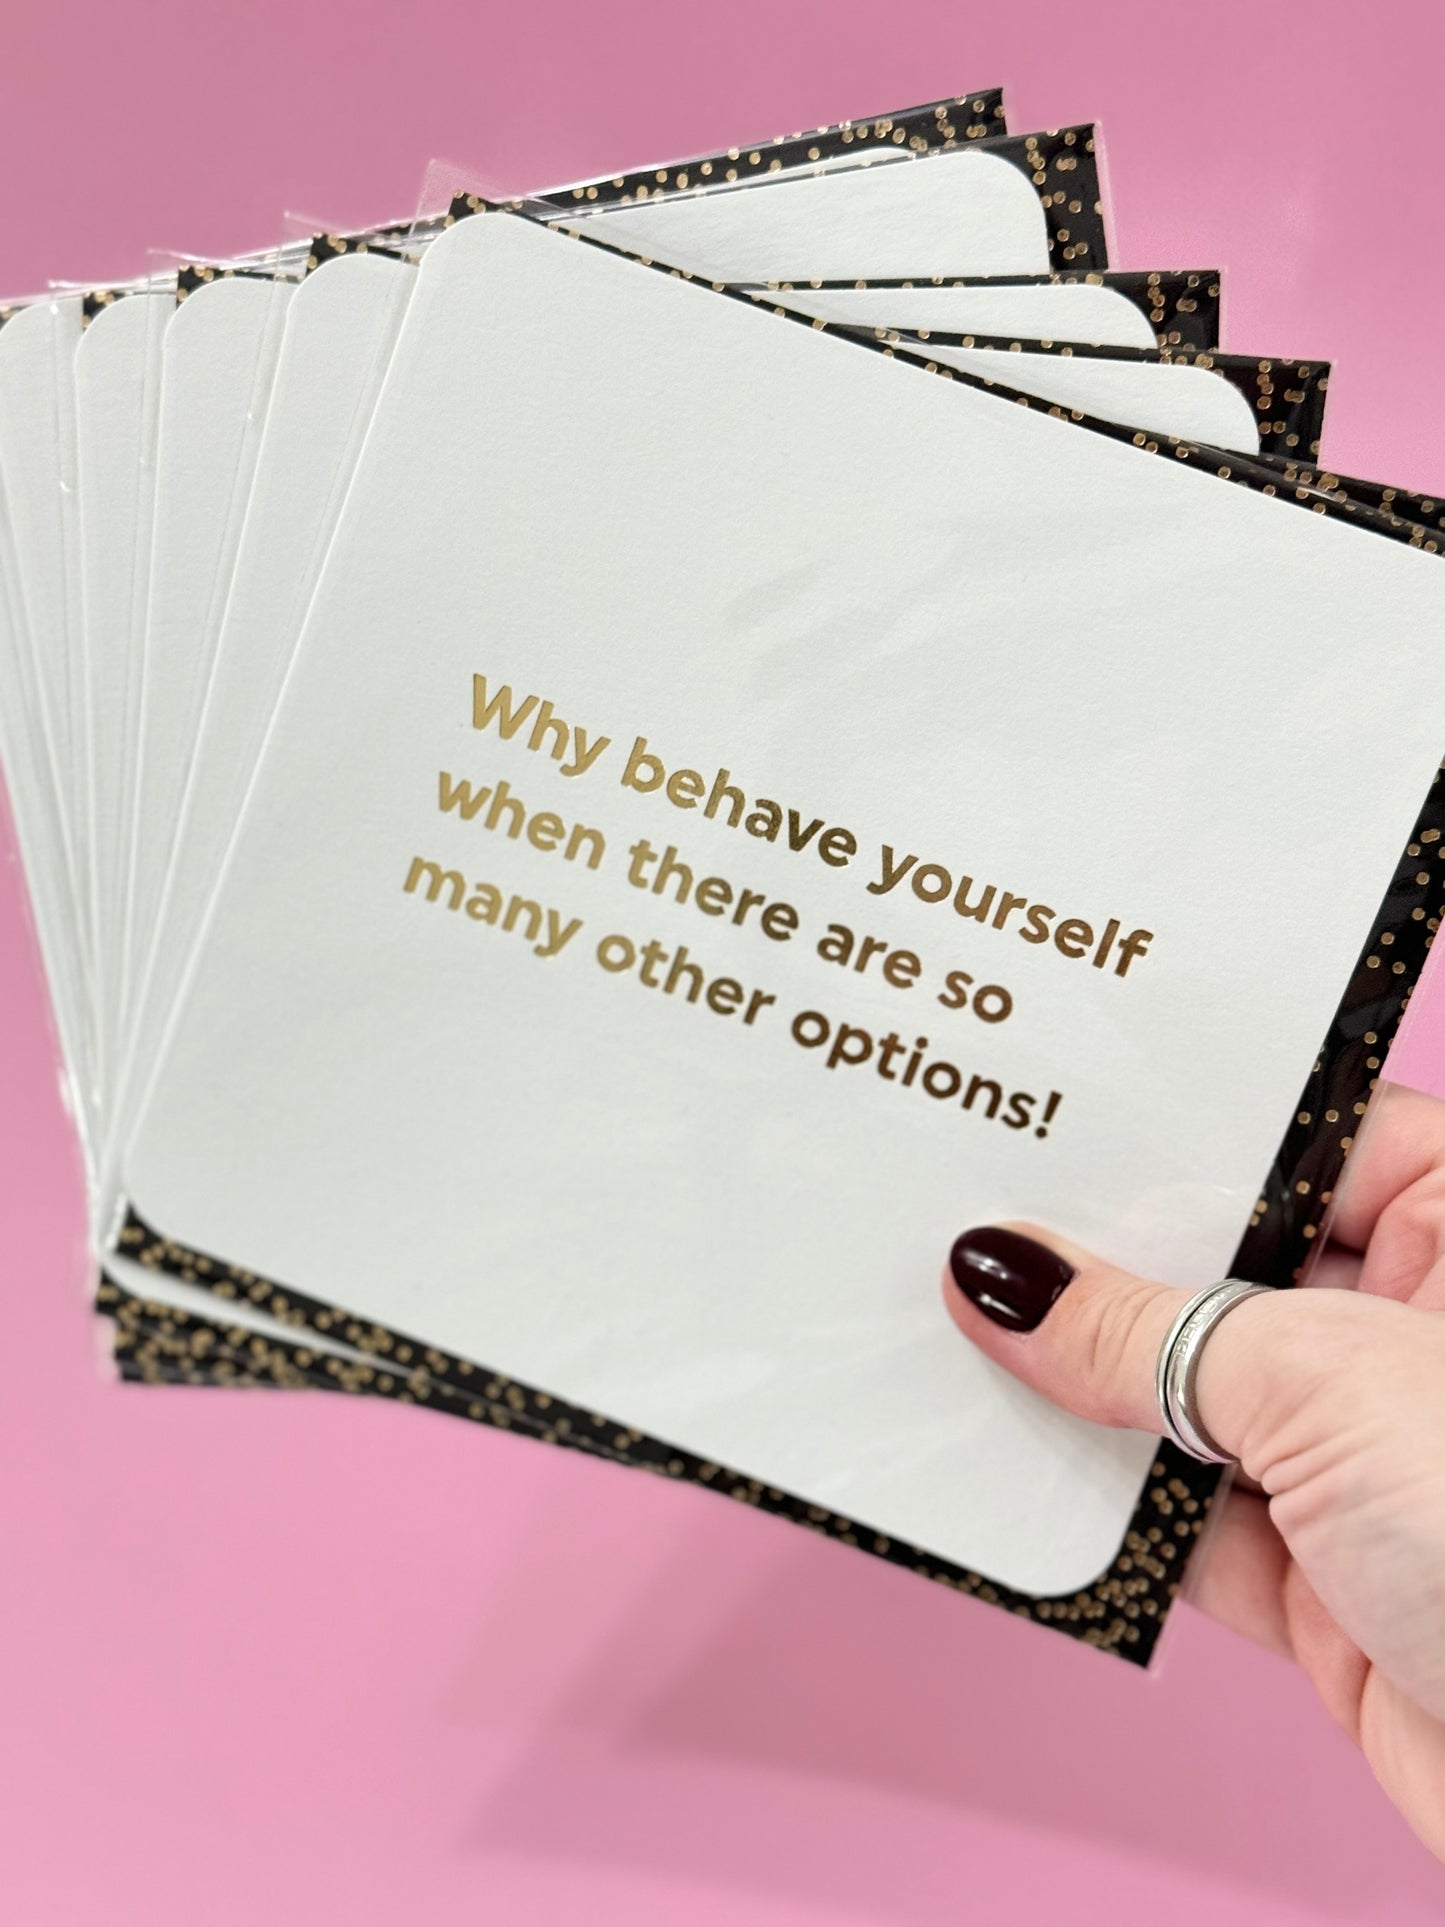 Greeting Card - Why Behave Yourself